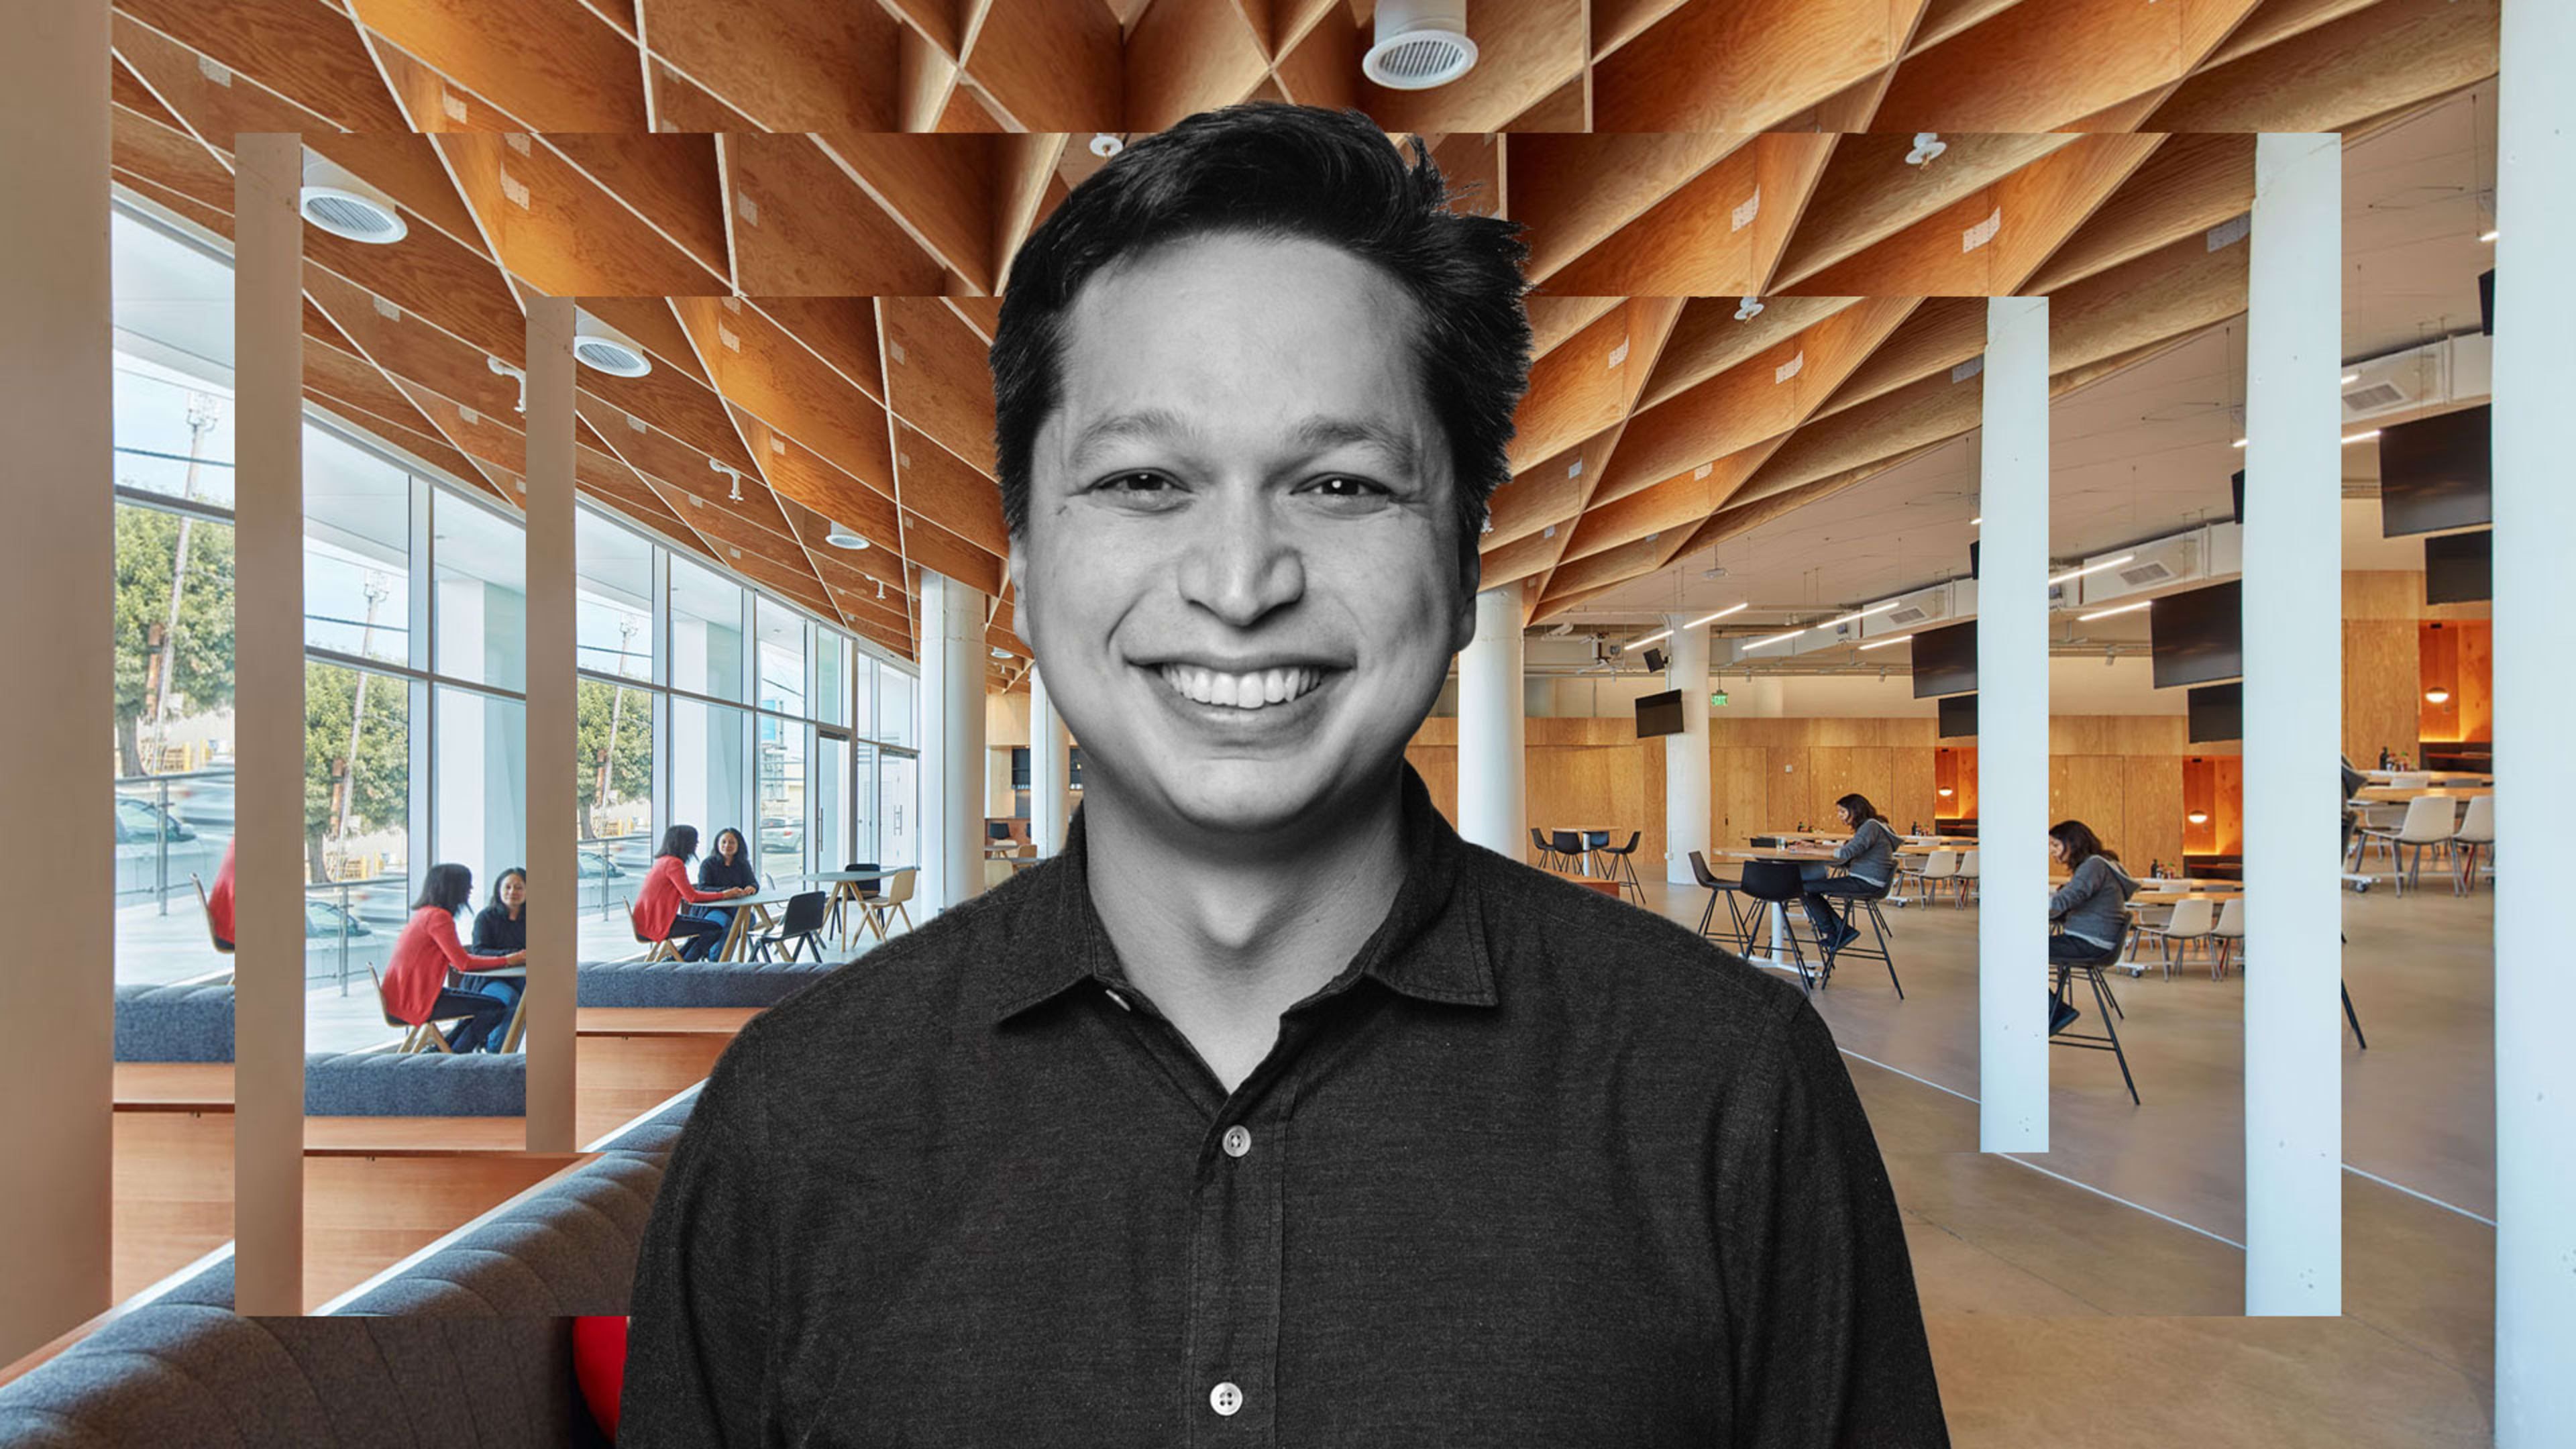 Pinterest CEO Ben Silbermann steps down—and Google’s e-commerce exec takes the reins